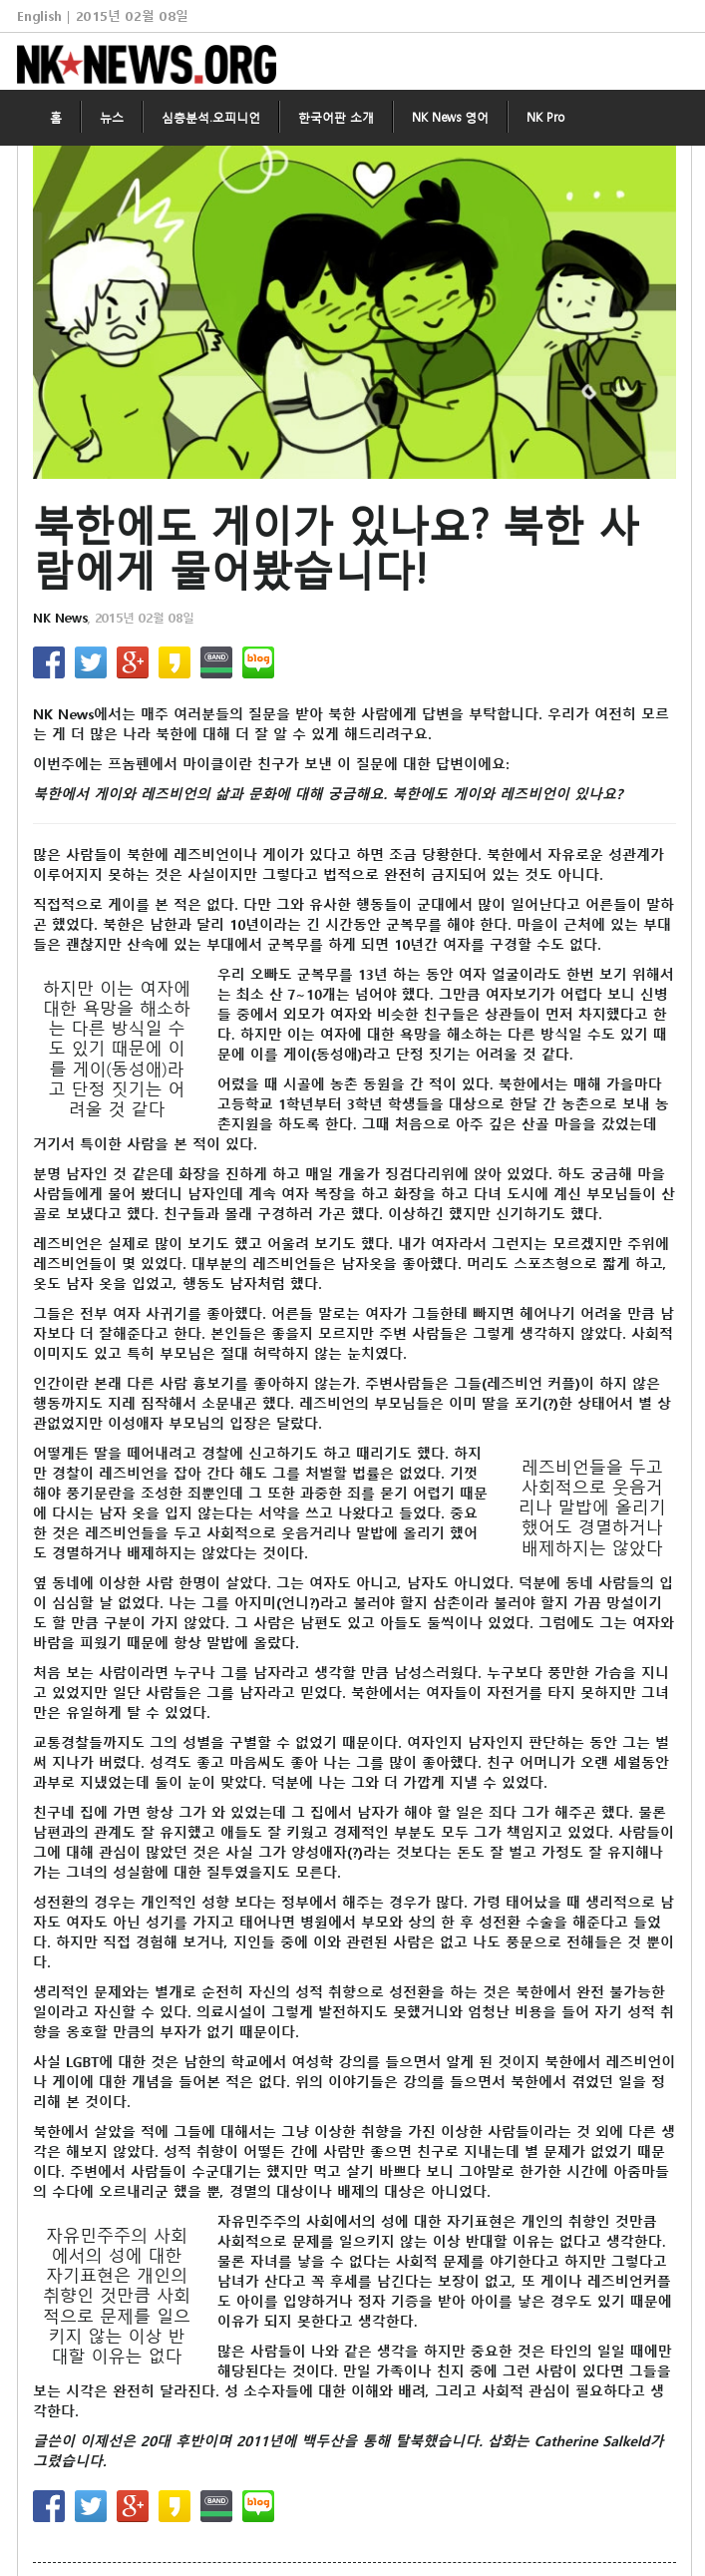 File:NK News article about LGBT.png